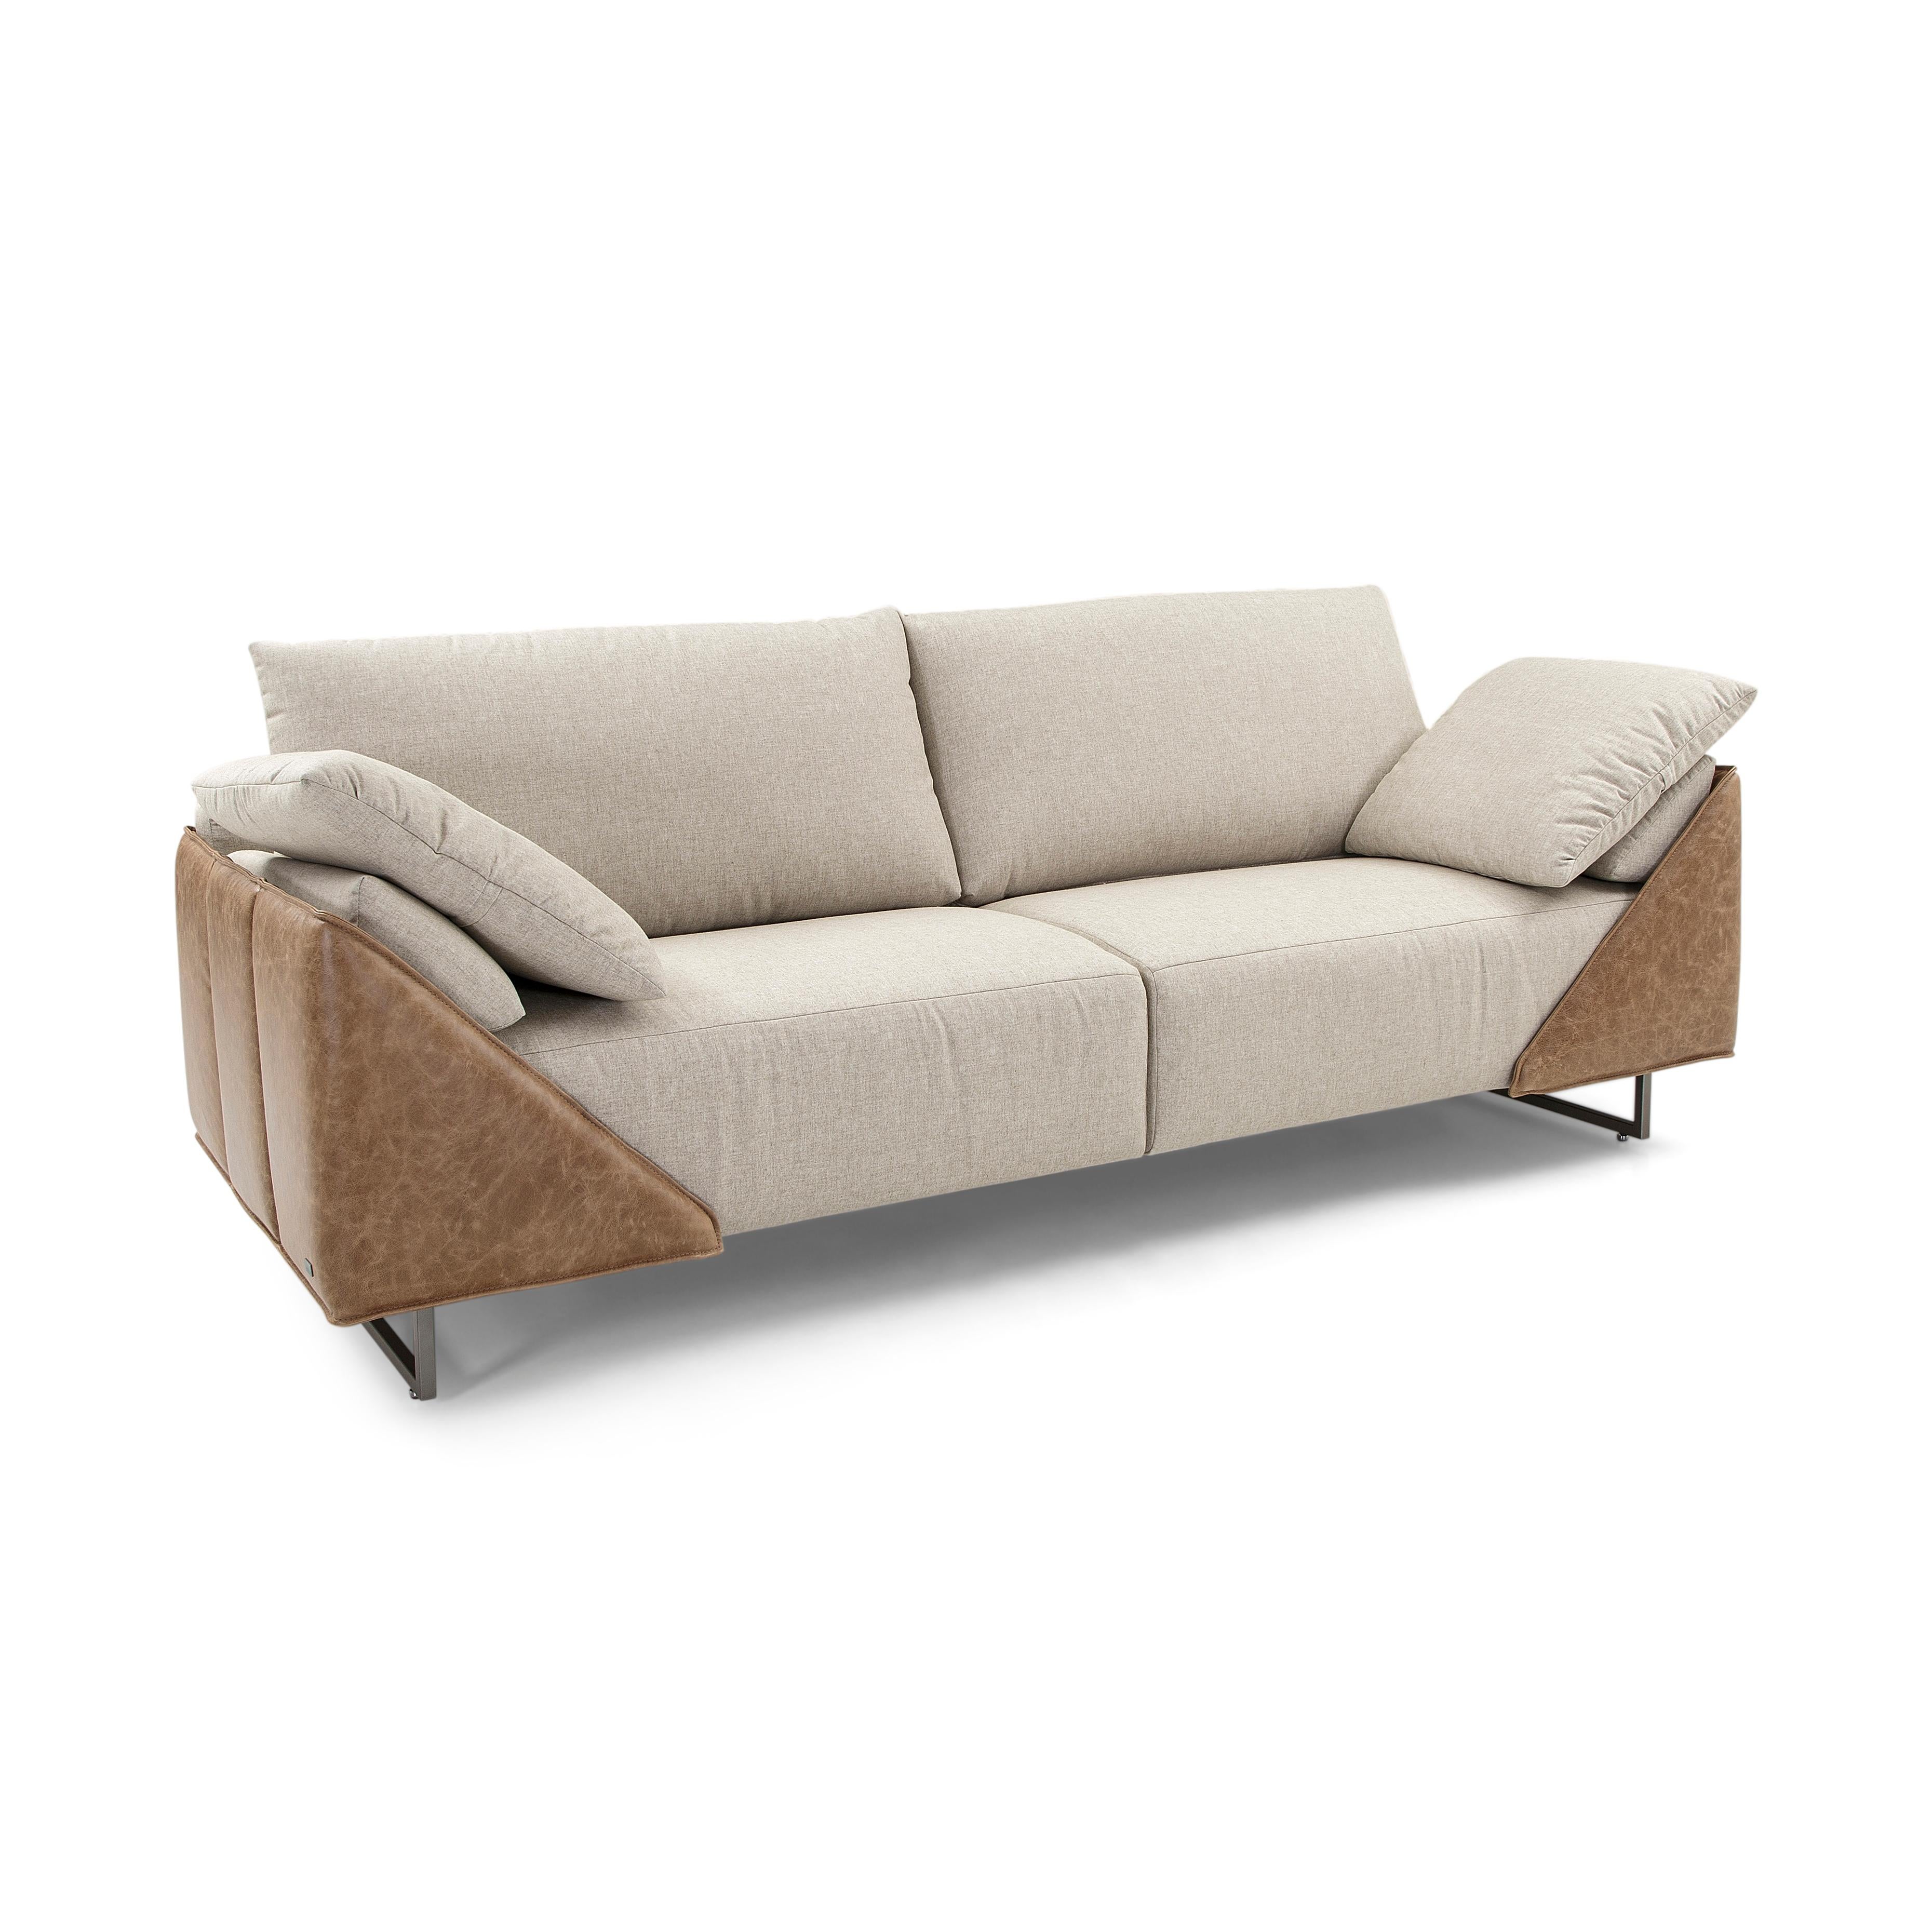 Brazilian Gondole Contemporary Sofa Upholstered in a Beige Fabric and Brown Leather 